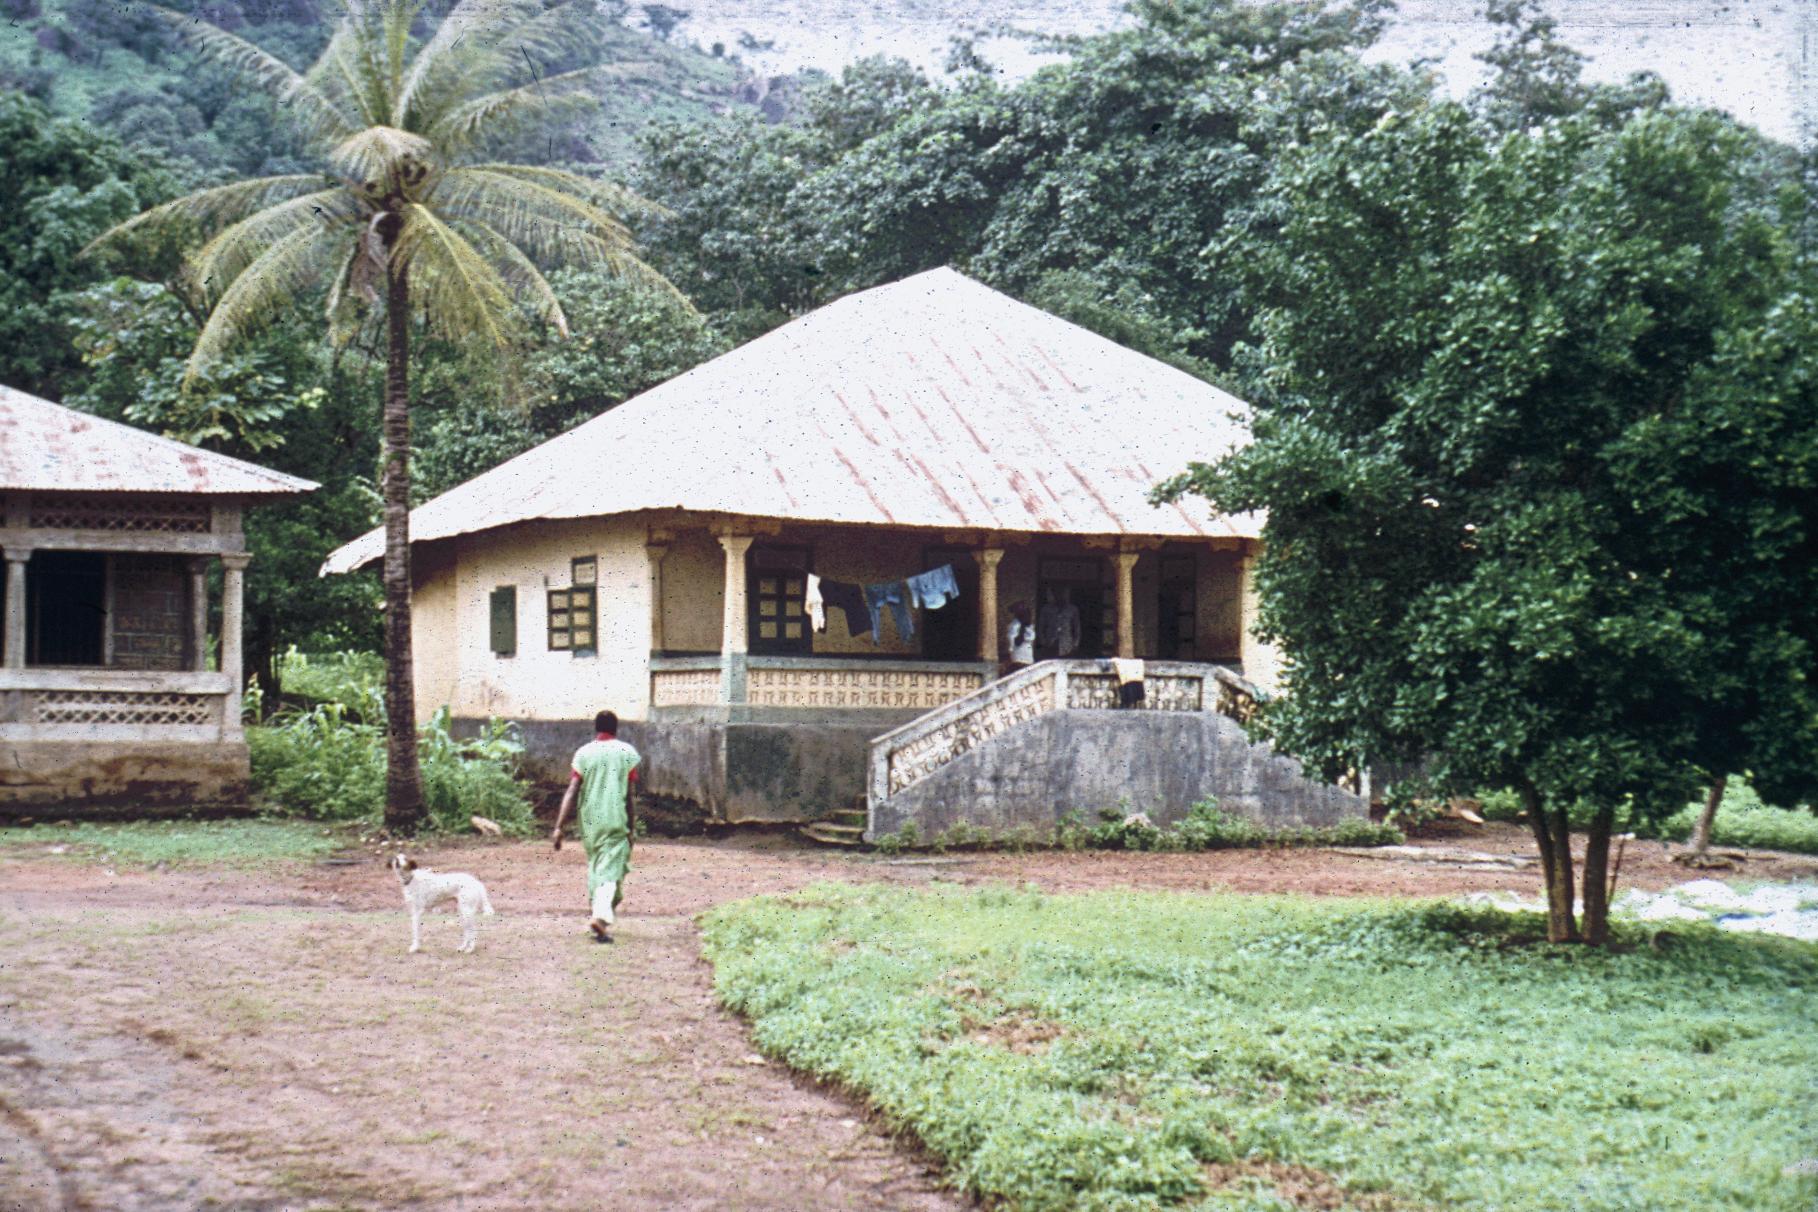 Typical Concrete House with Corrugated Tin Roof (Pan Roof) at Kamabai